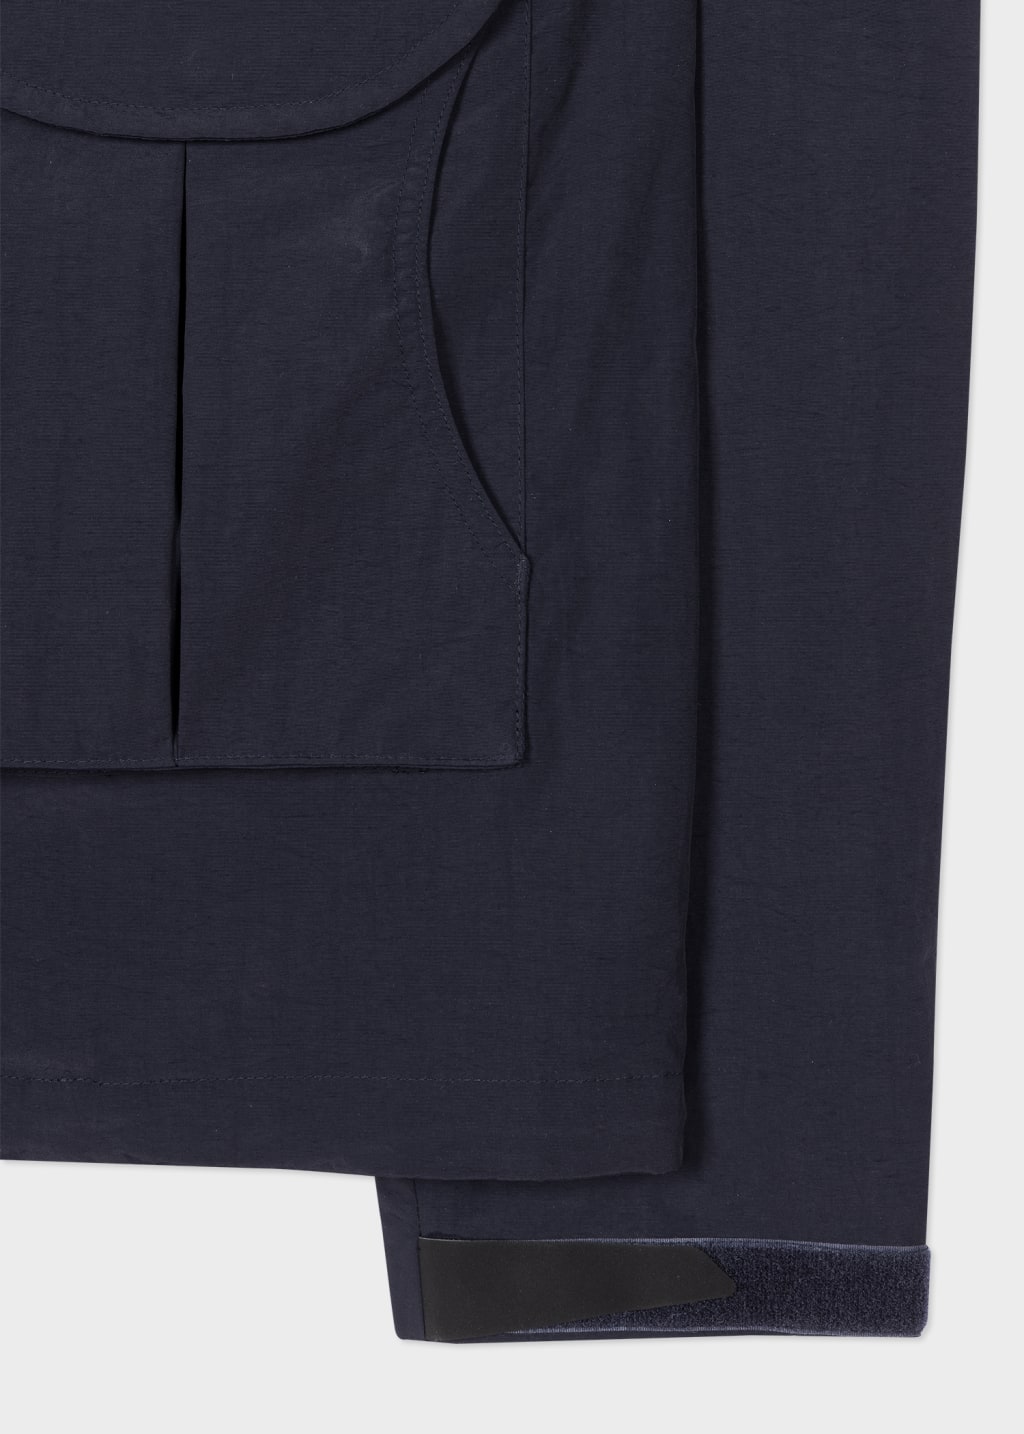 Detail View - Navy Recycled Nylon Hooded Fishing Jacket Paul Smith